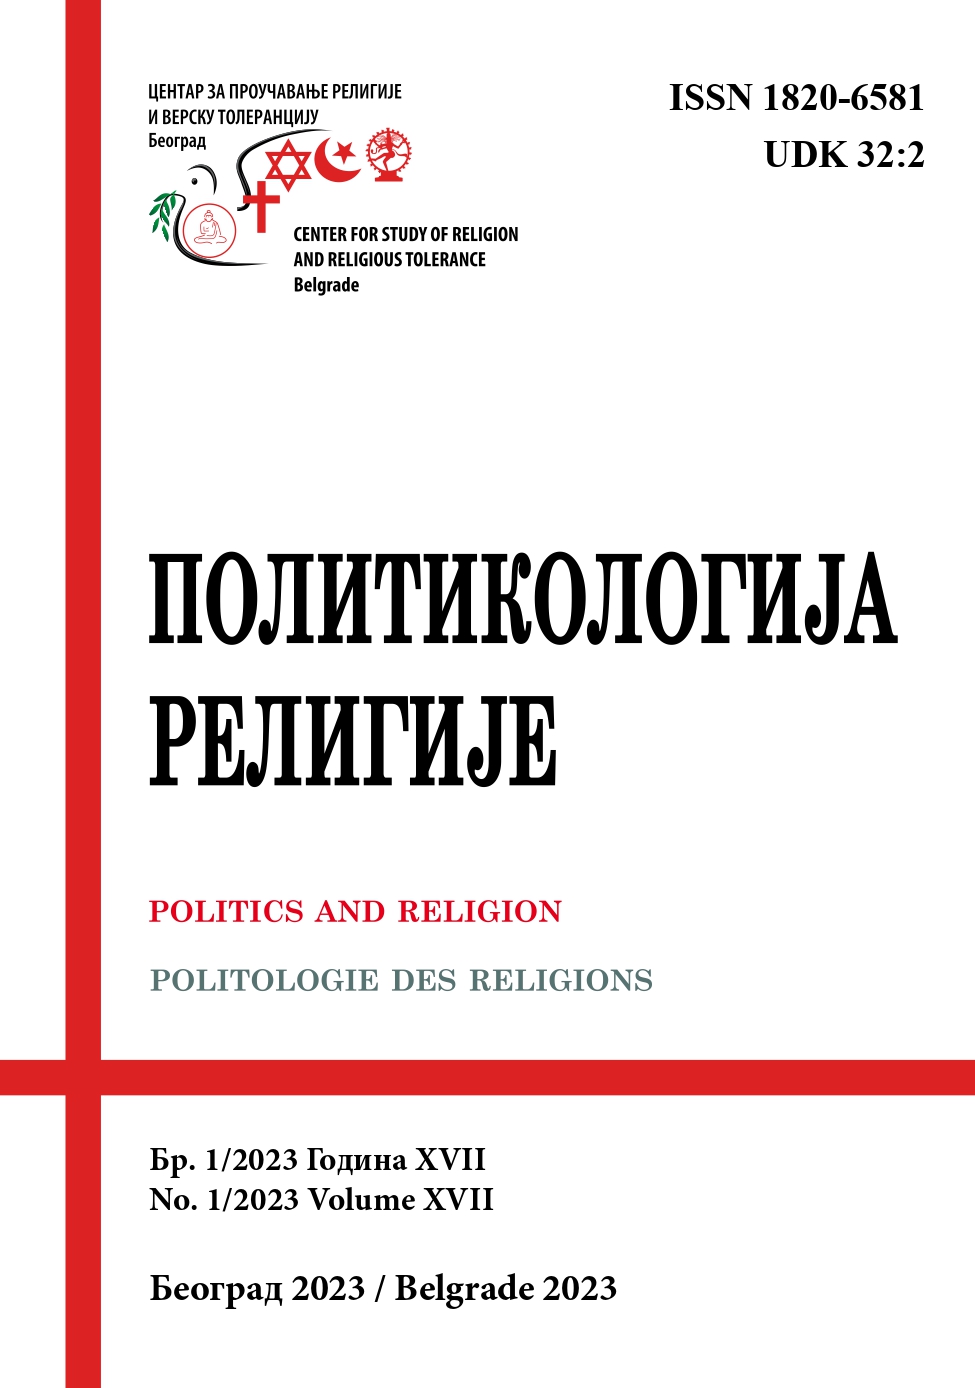 JAHILIYYAH RHETORIC AS A DIVINE LEGITIMACY FOR VIOLENCE: A STUDY OF THE INFLUENCE OF SAYYID QUTB AND THE CONTEMPORARY ISLAMIST ORTHODOXY ONAL-QAEDA, THE TALIBAN, AND THE ISLAMIC STATE Cover Image